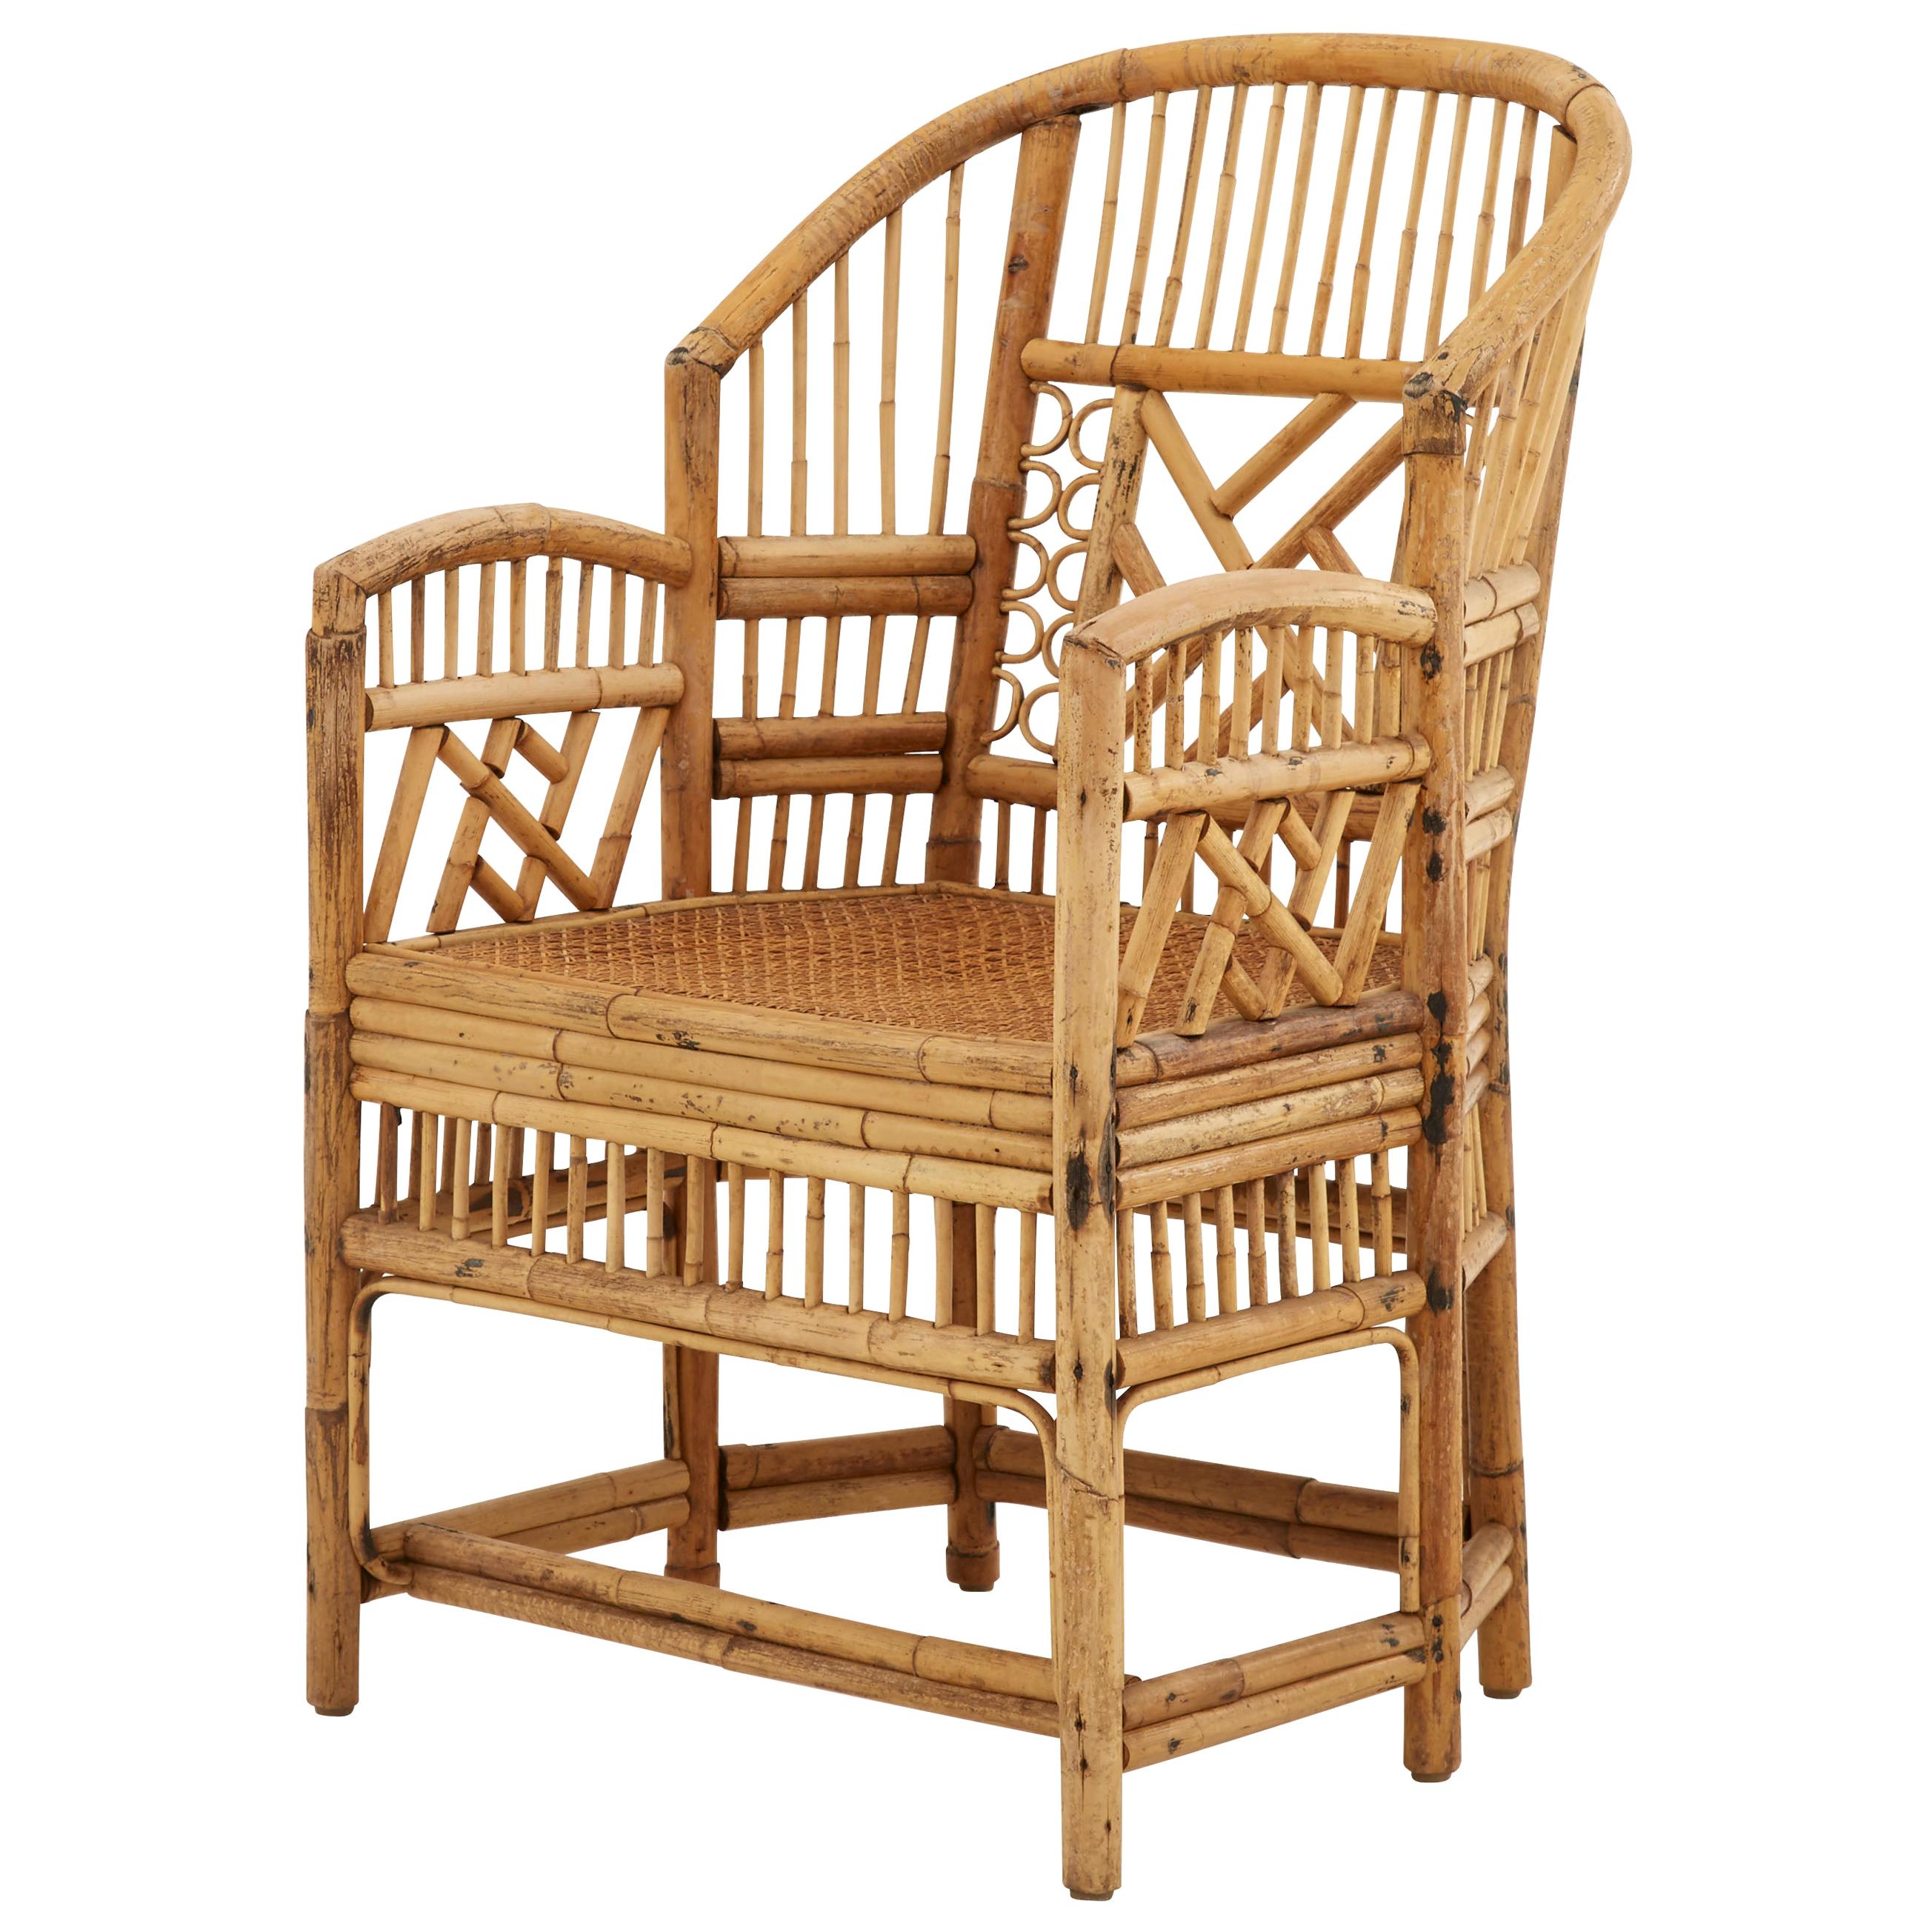 Midcentury Bamboo and Rattan Armchair with Cane Seat